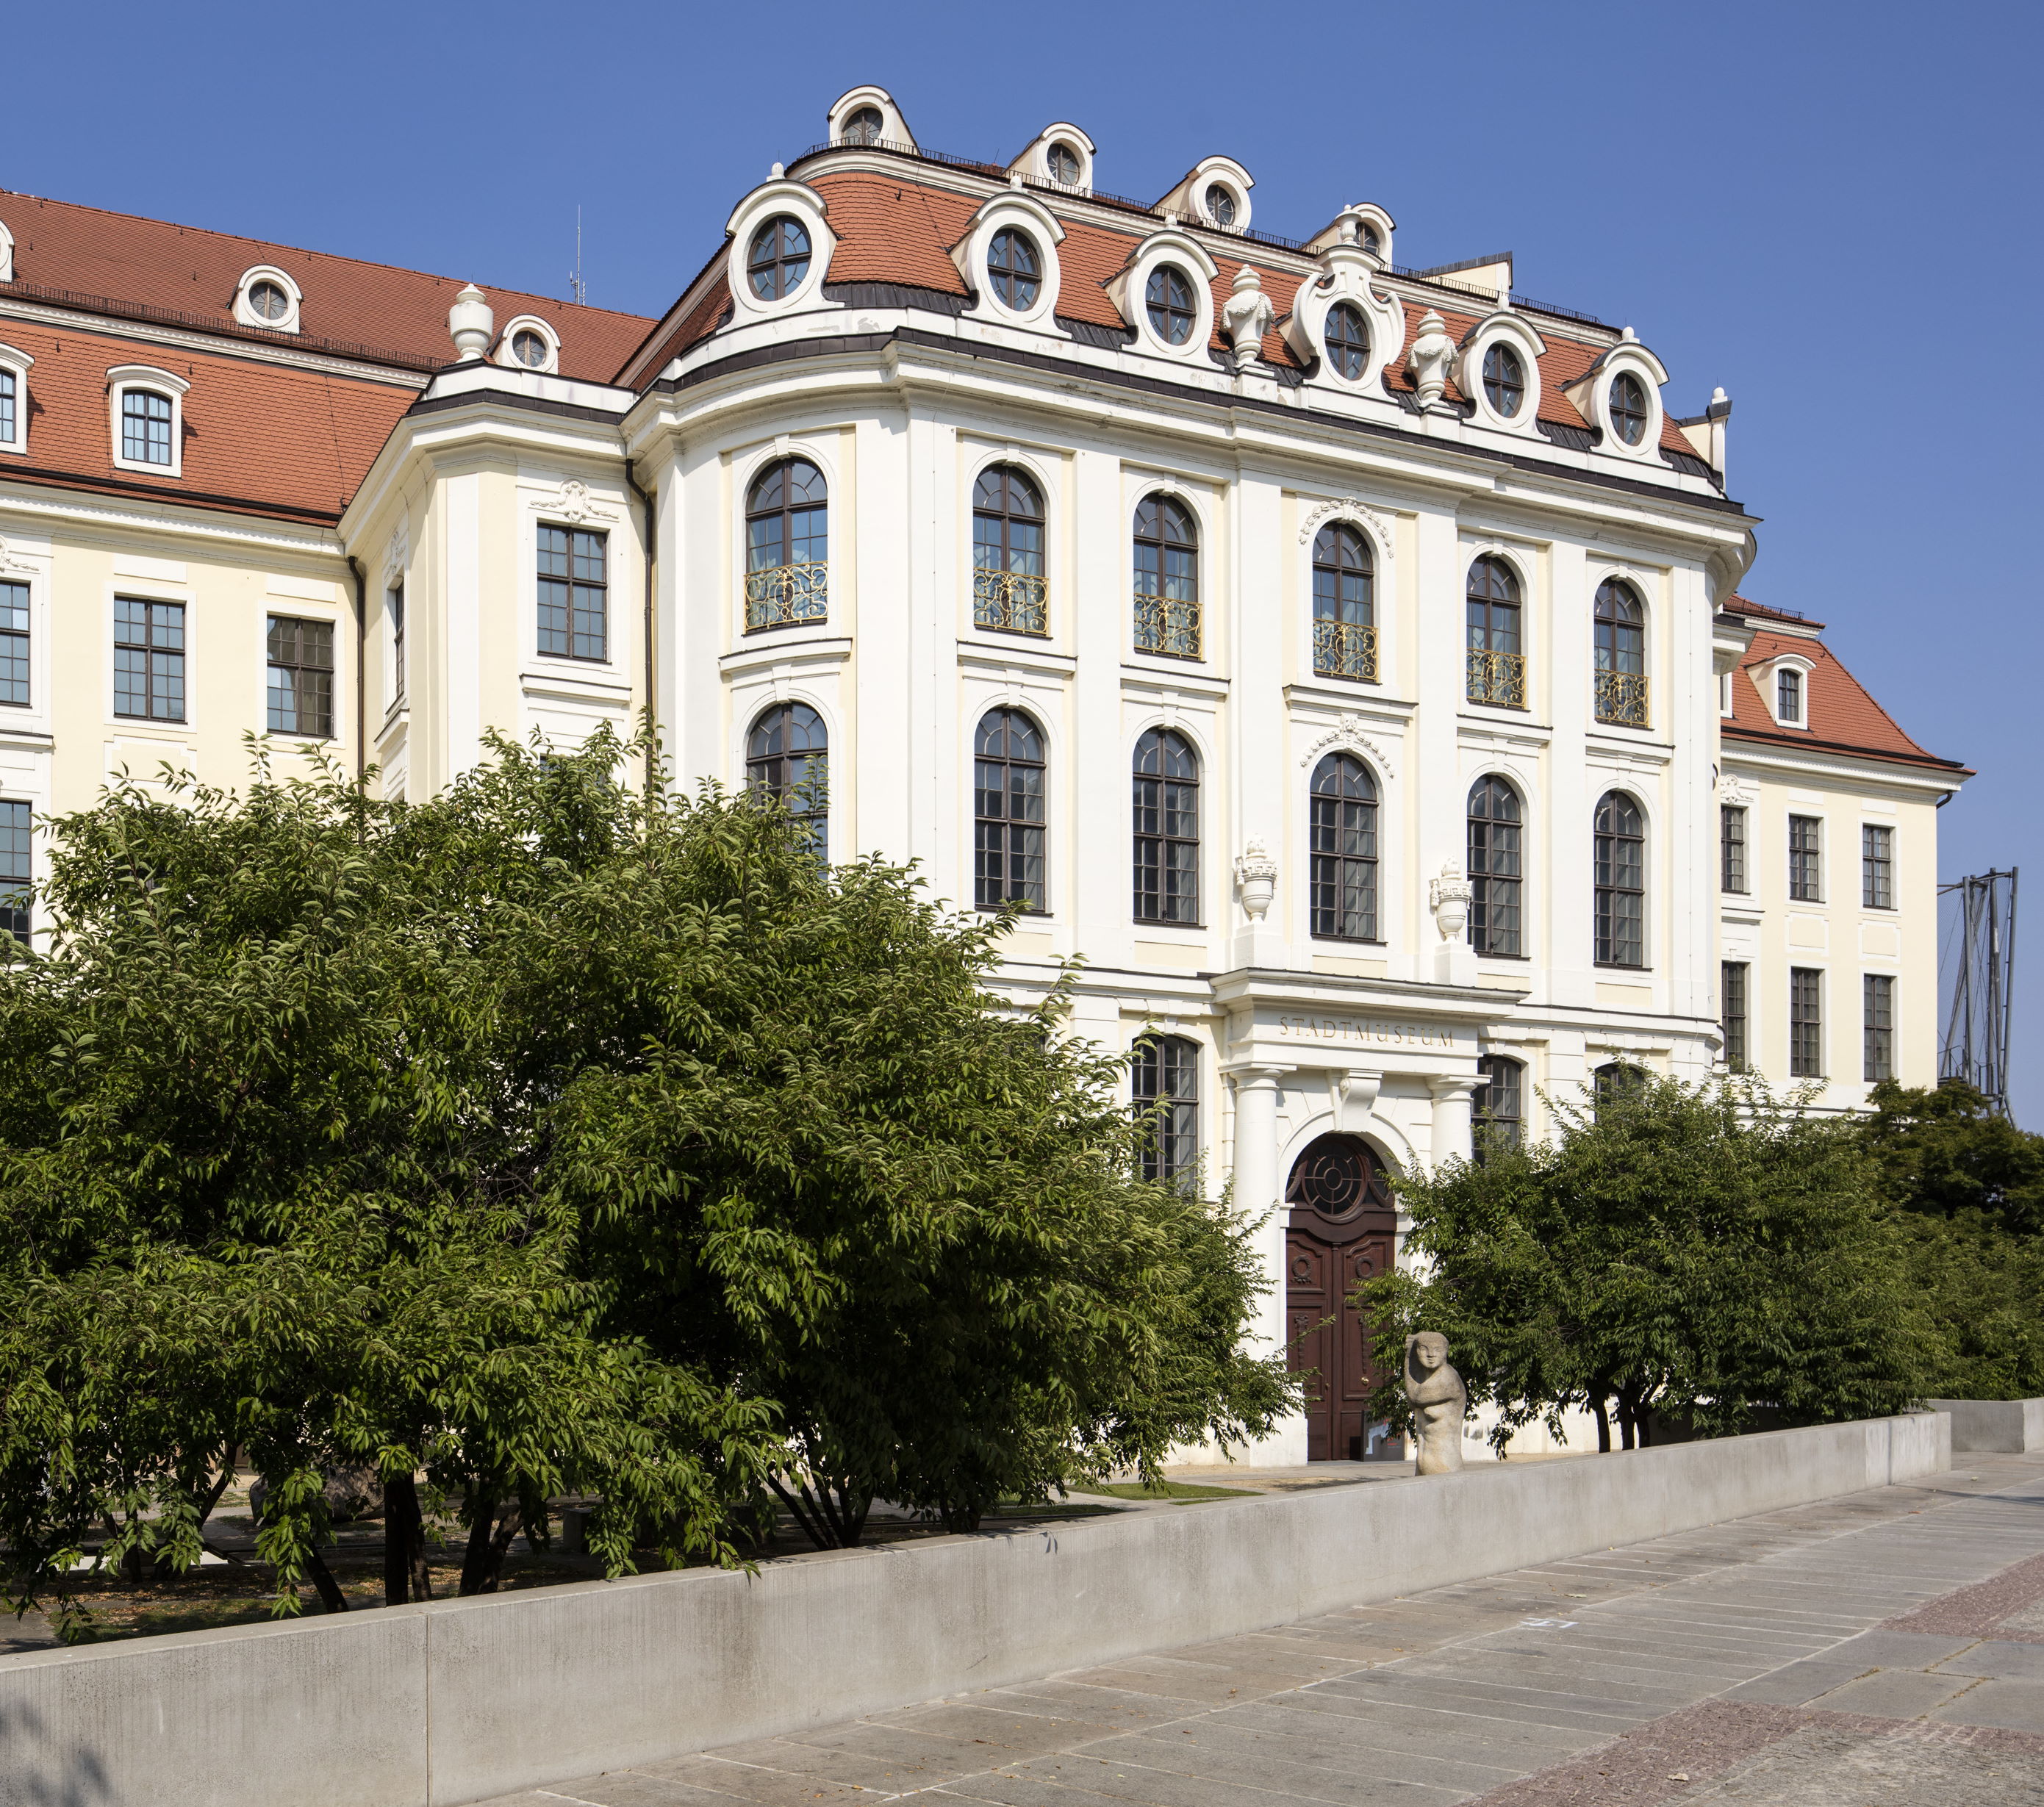 City cultural institutions